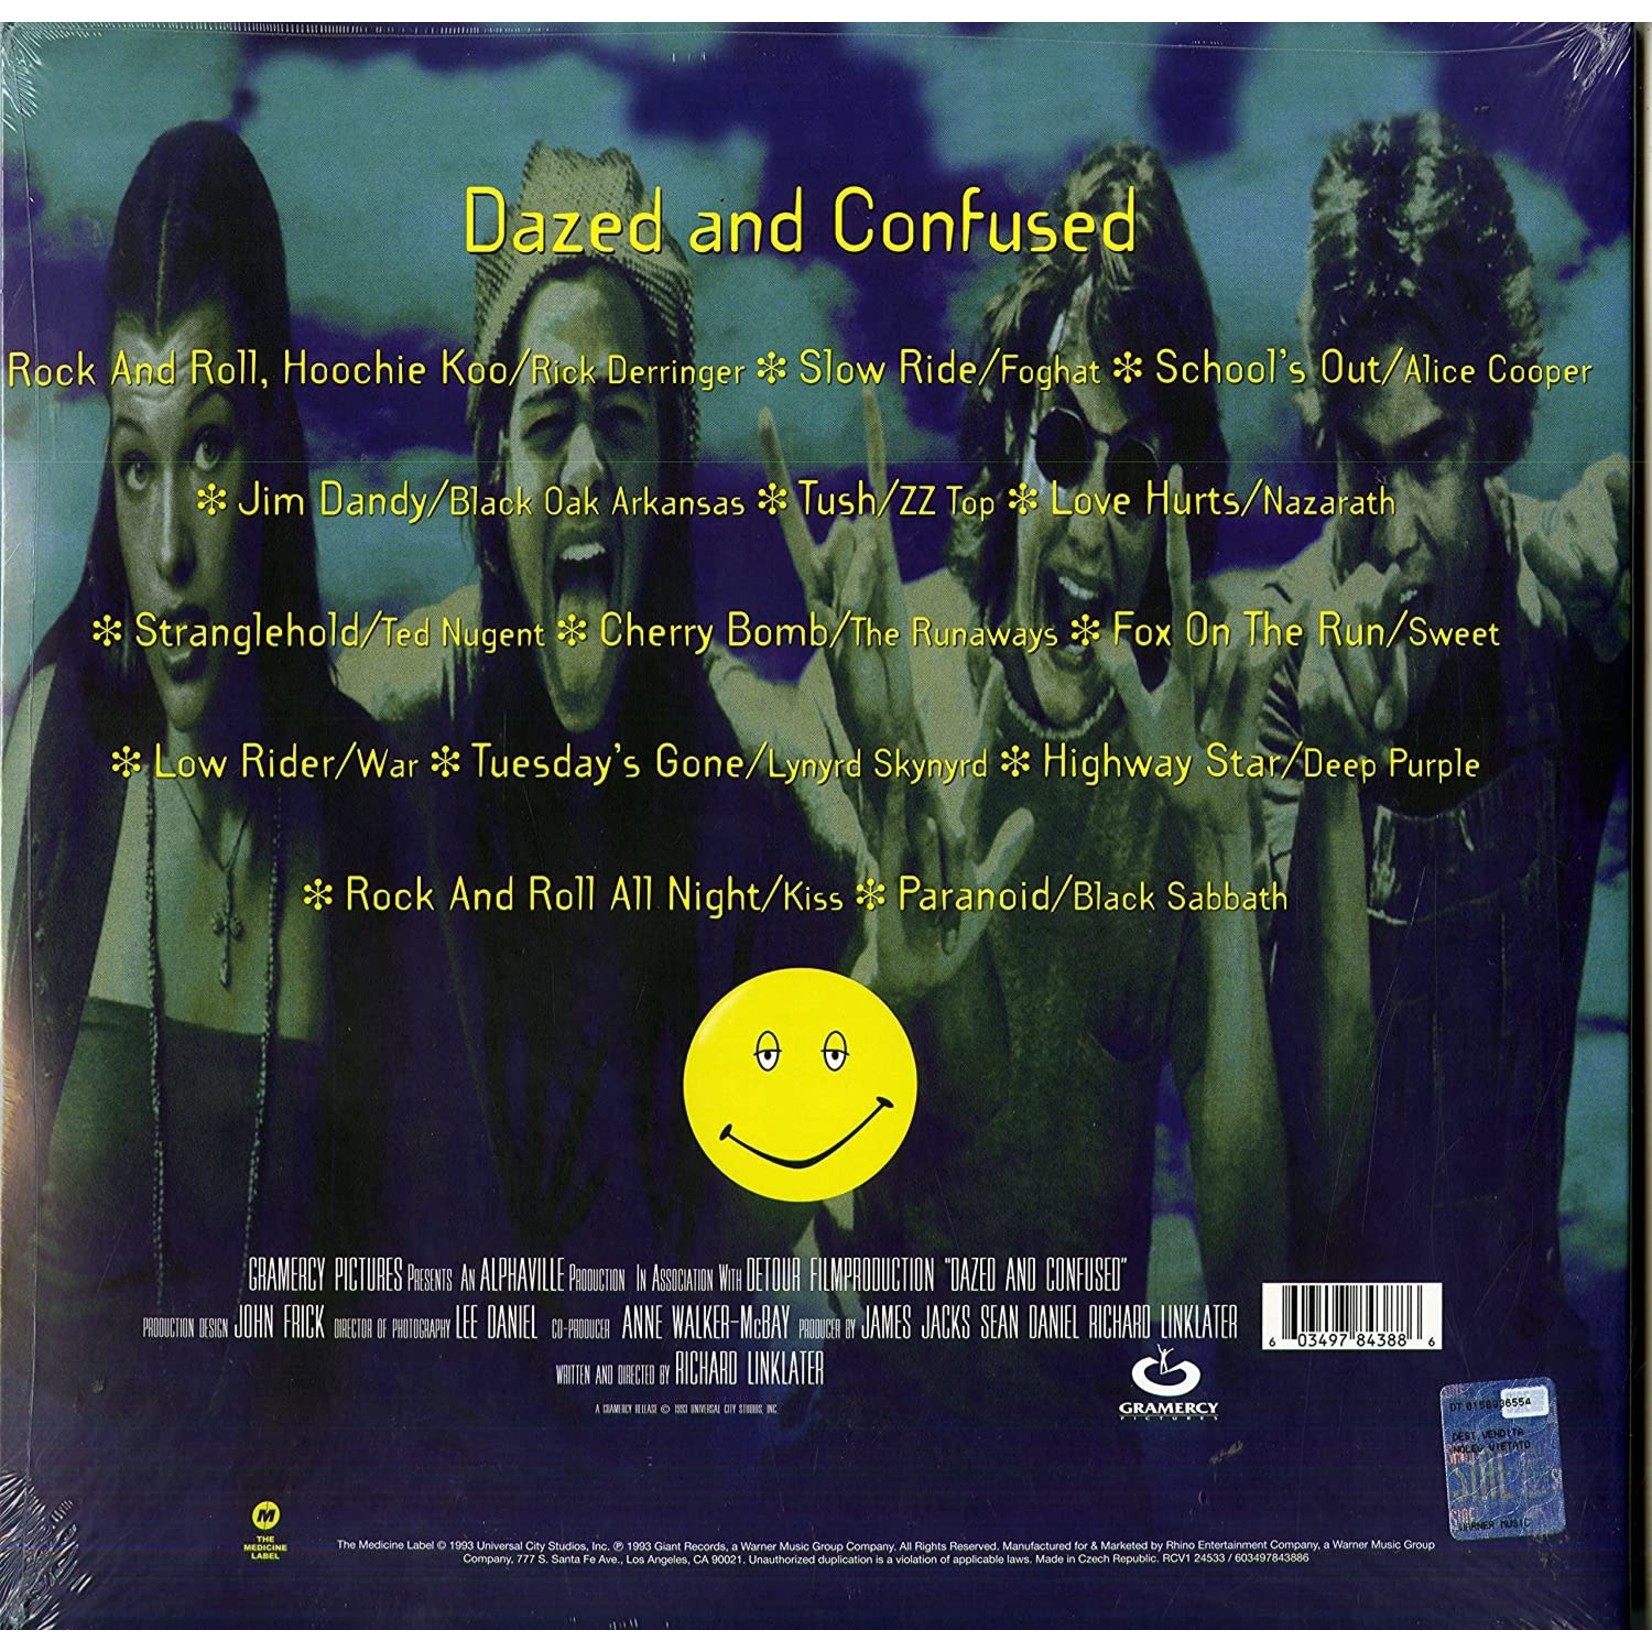 VARIOUS ARTISTS DAZED AND CONFUSED (MUSIC FROM THE MOTION PICTURE) TRANS PURPLE 2 LP